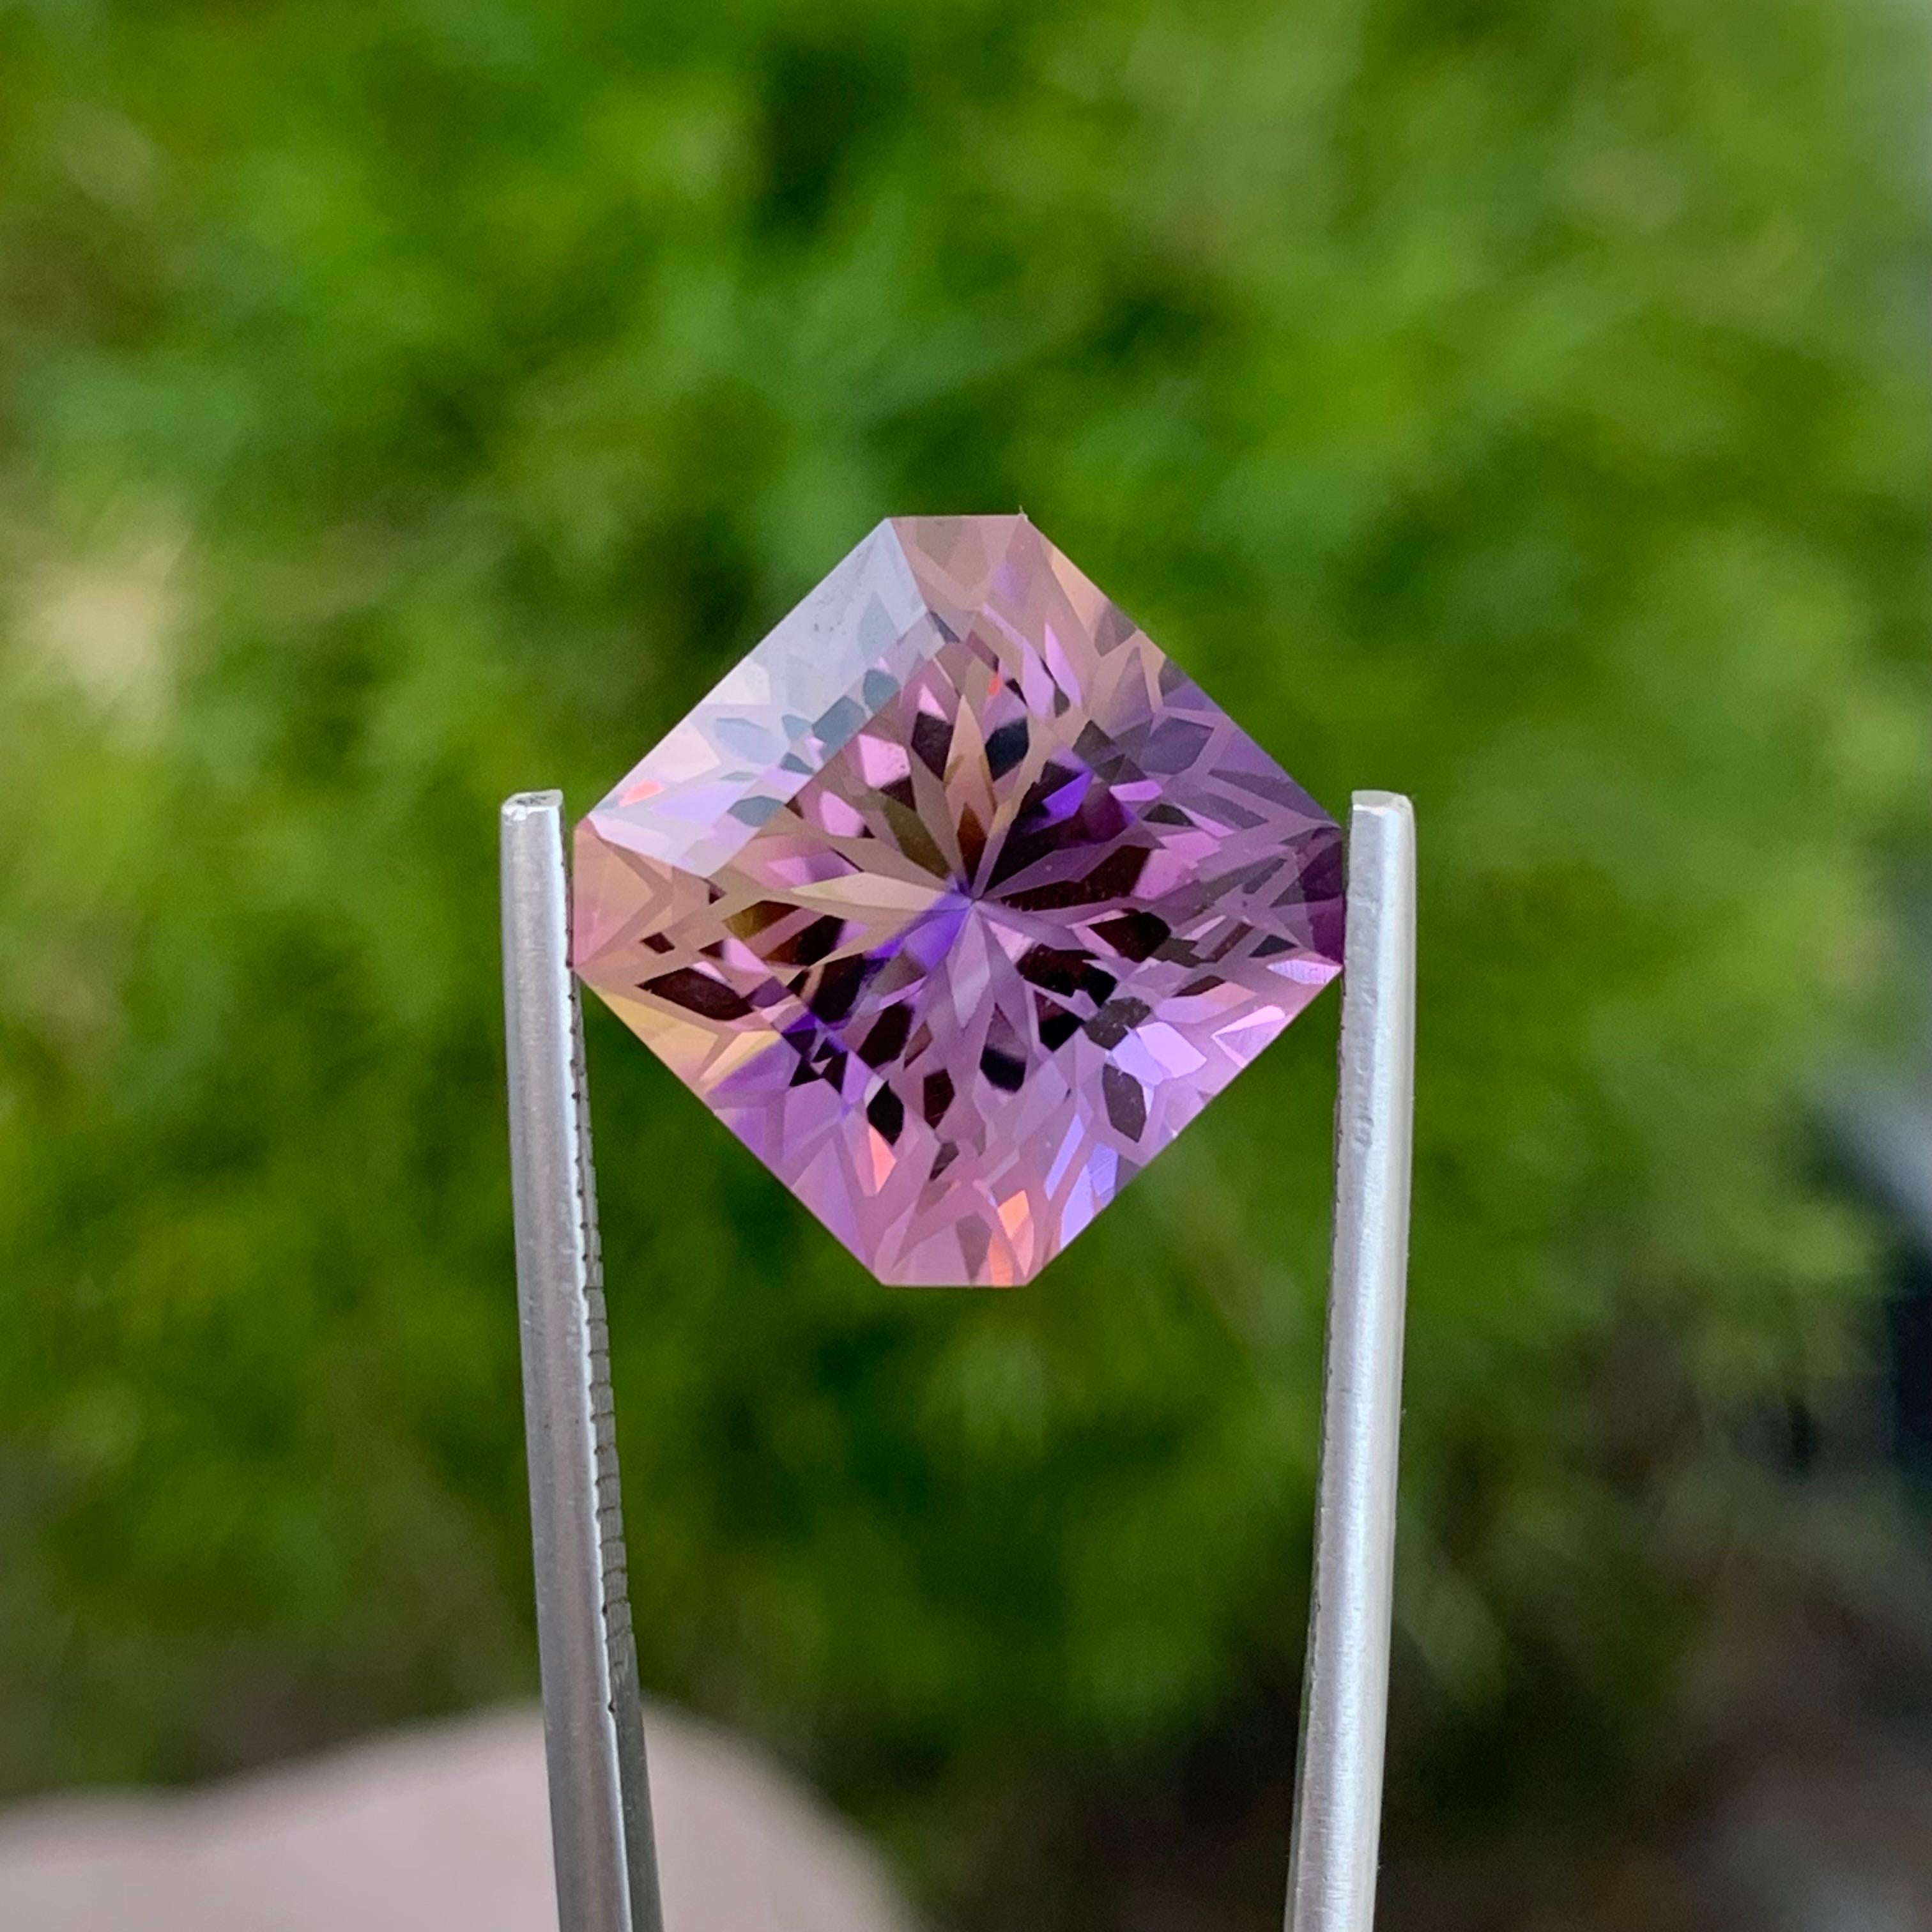 Loose Ametrine
Weight: 13.65 Carats
Dimension: 13.9 x 13.9 x 11.1 Mm
Origin: Brazil
Shape : Square 
Treatment: Non
Certificate: On Demand


Ametrine, a captivating and unique gemstone, seamlessly blends the enchanting colors of amethyst and citrine